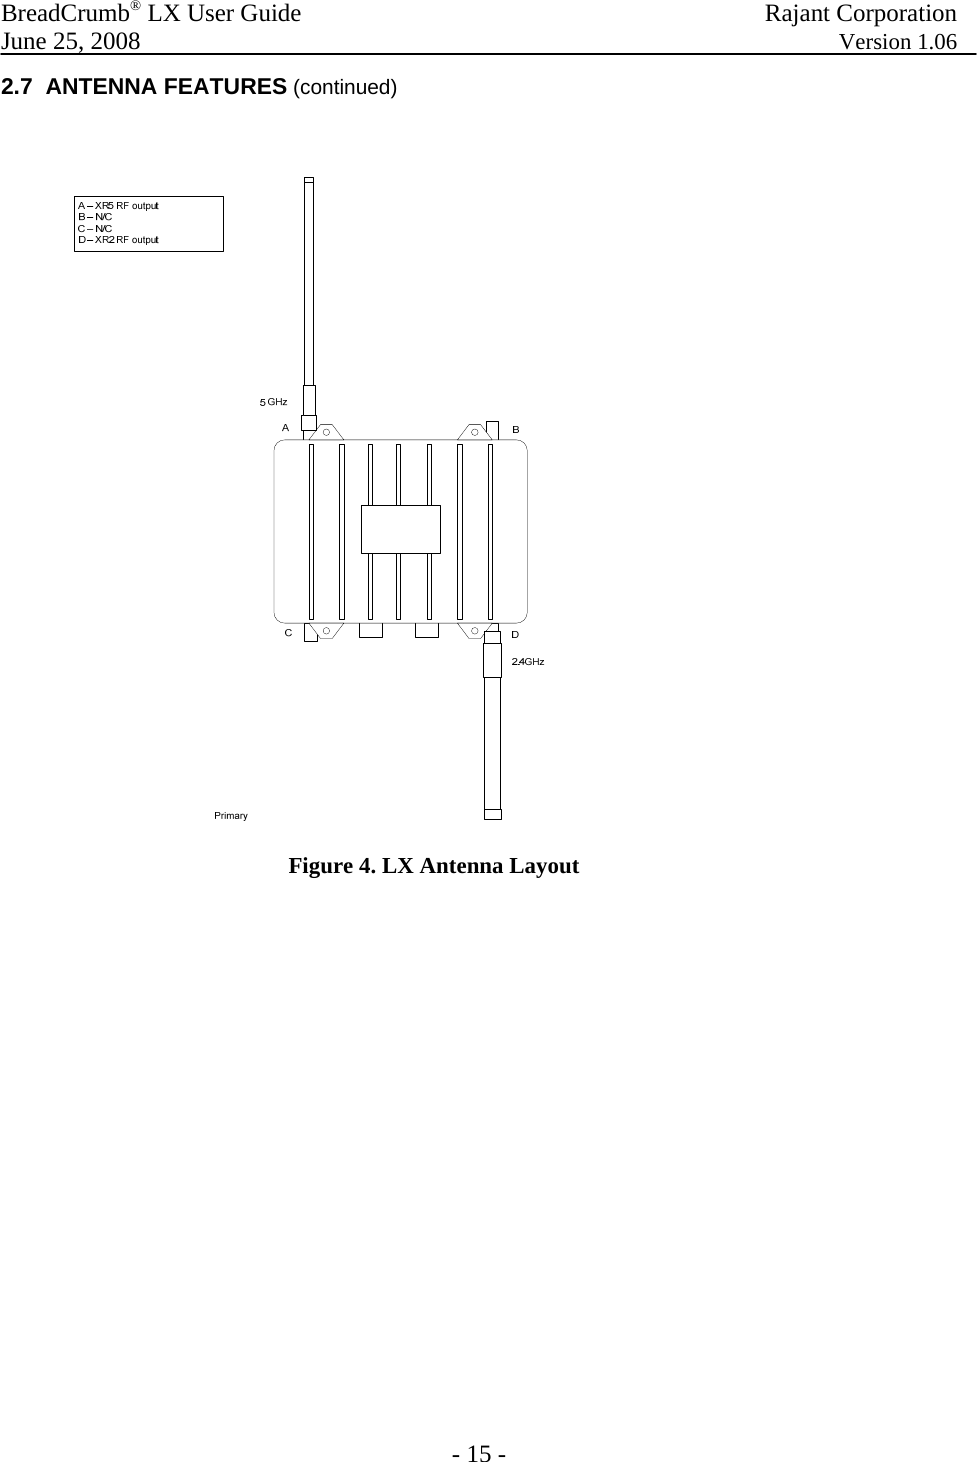 BreadCrumb® LX User Guide  Rajant Corporation  June 25, 2008  Version 1.06 - 15 - 2.7  ANTENNA FEATURES (continued)   Figure 4. LX Antenna Layout               